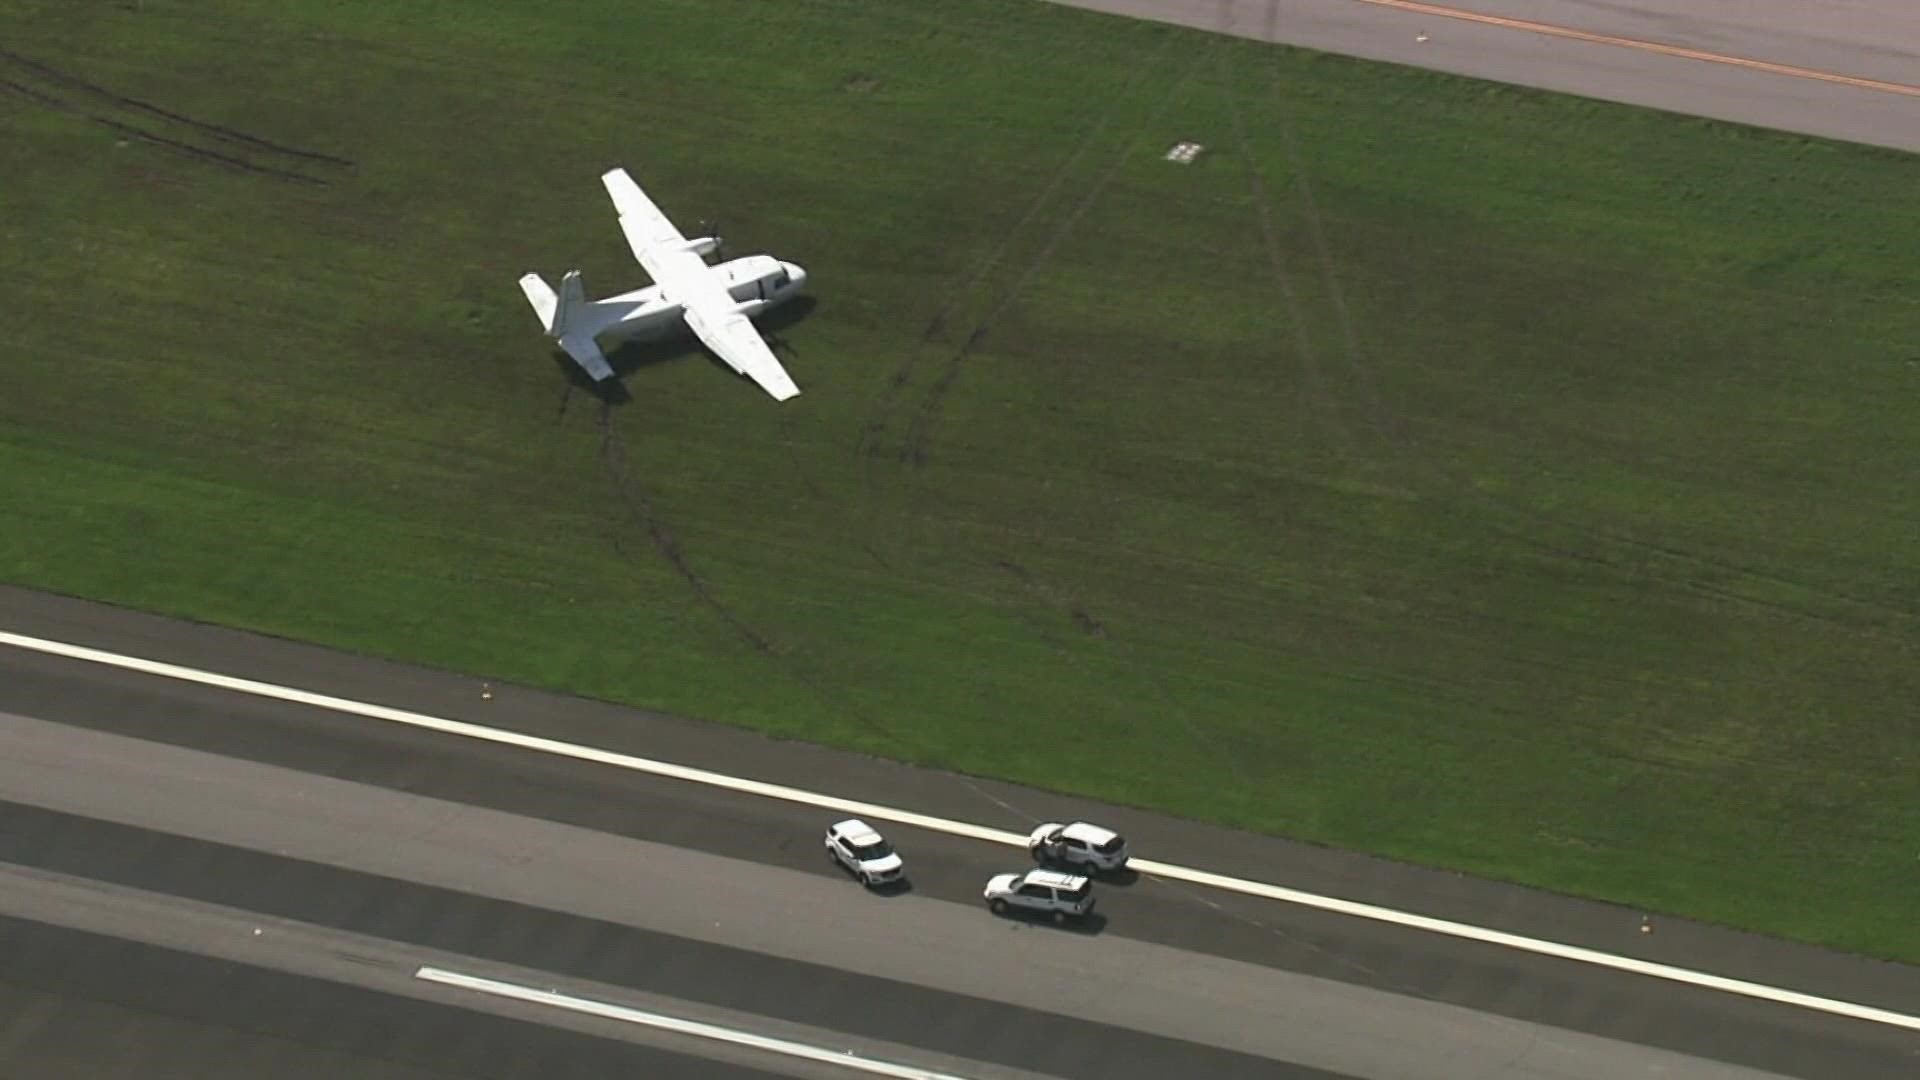 Tuesday, the NTSB released a preliminary incident report on the July 29 emergency landing.